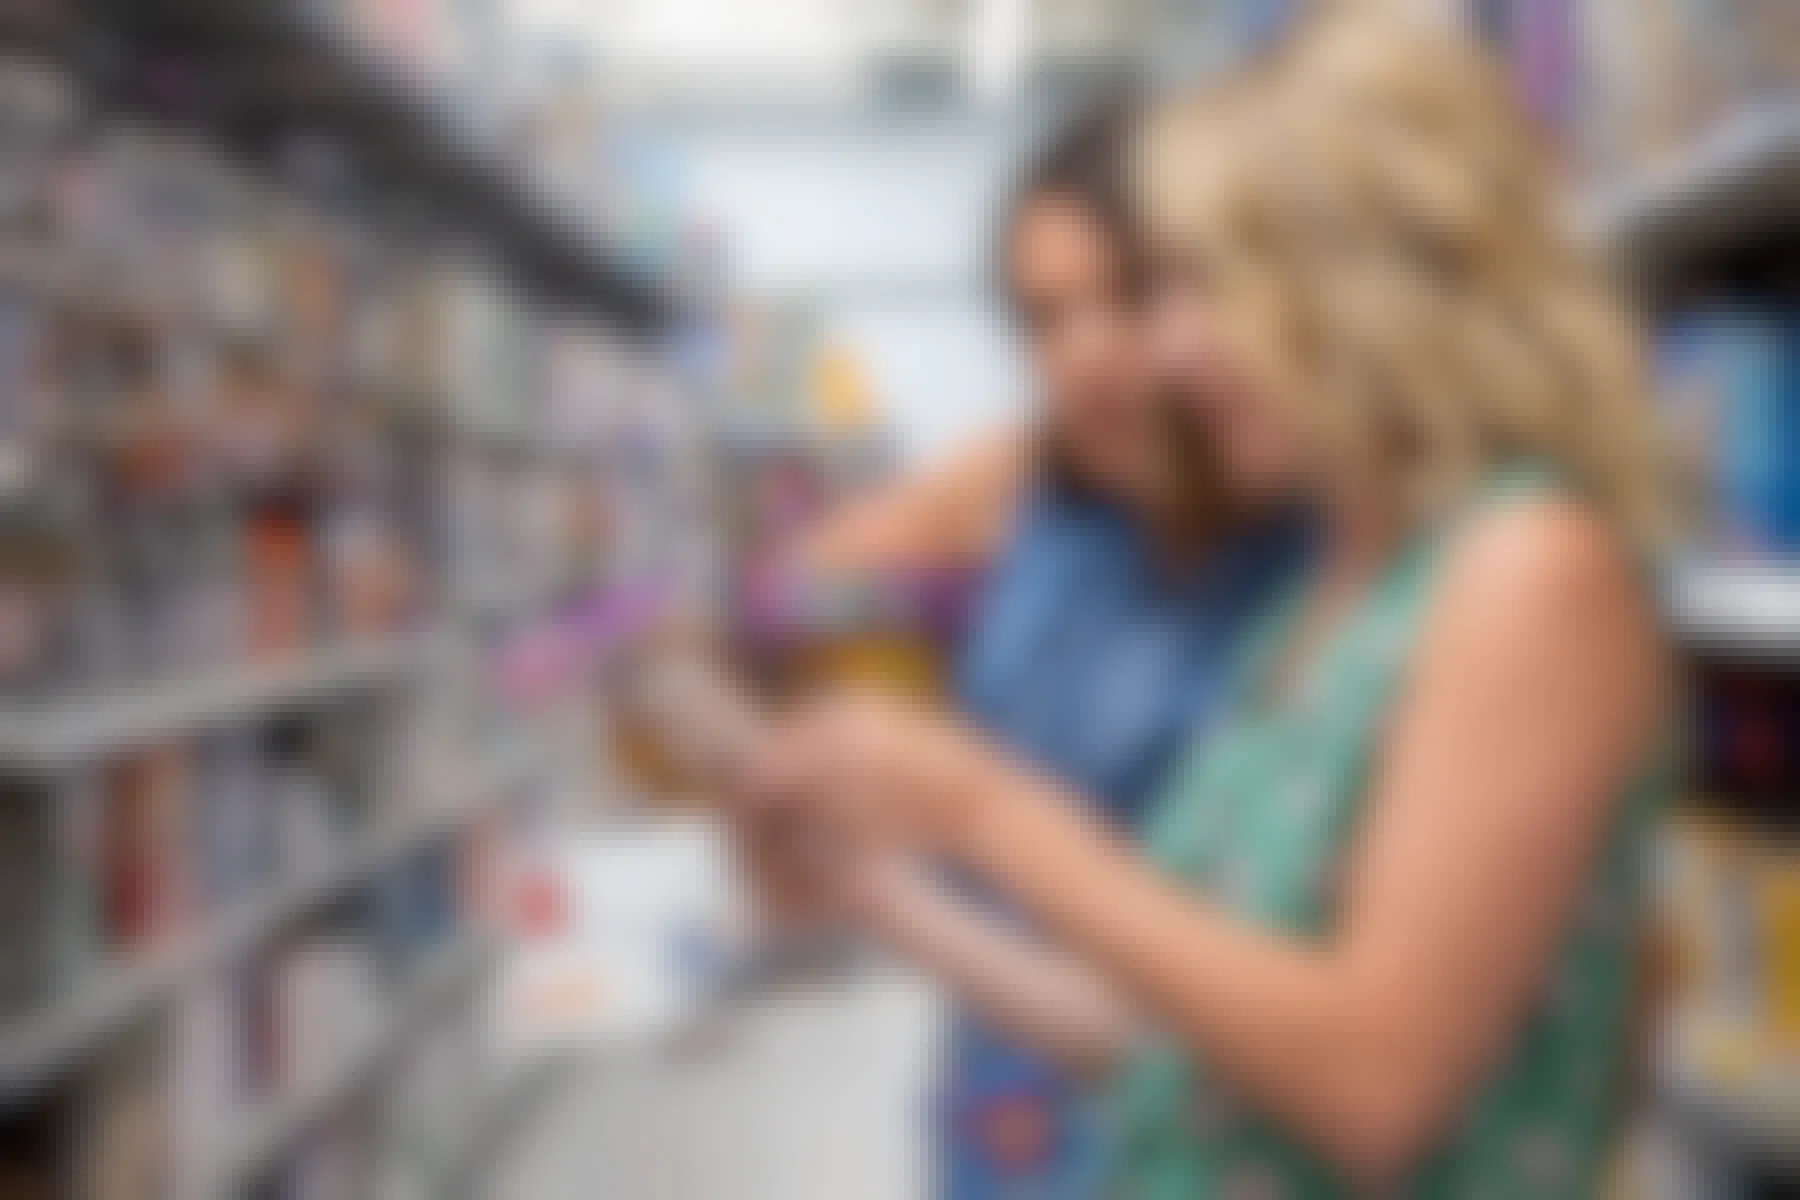 Two women standing in the toy aisle at Walmart, looking at a cell phone.